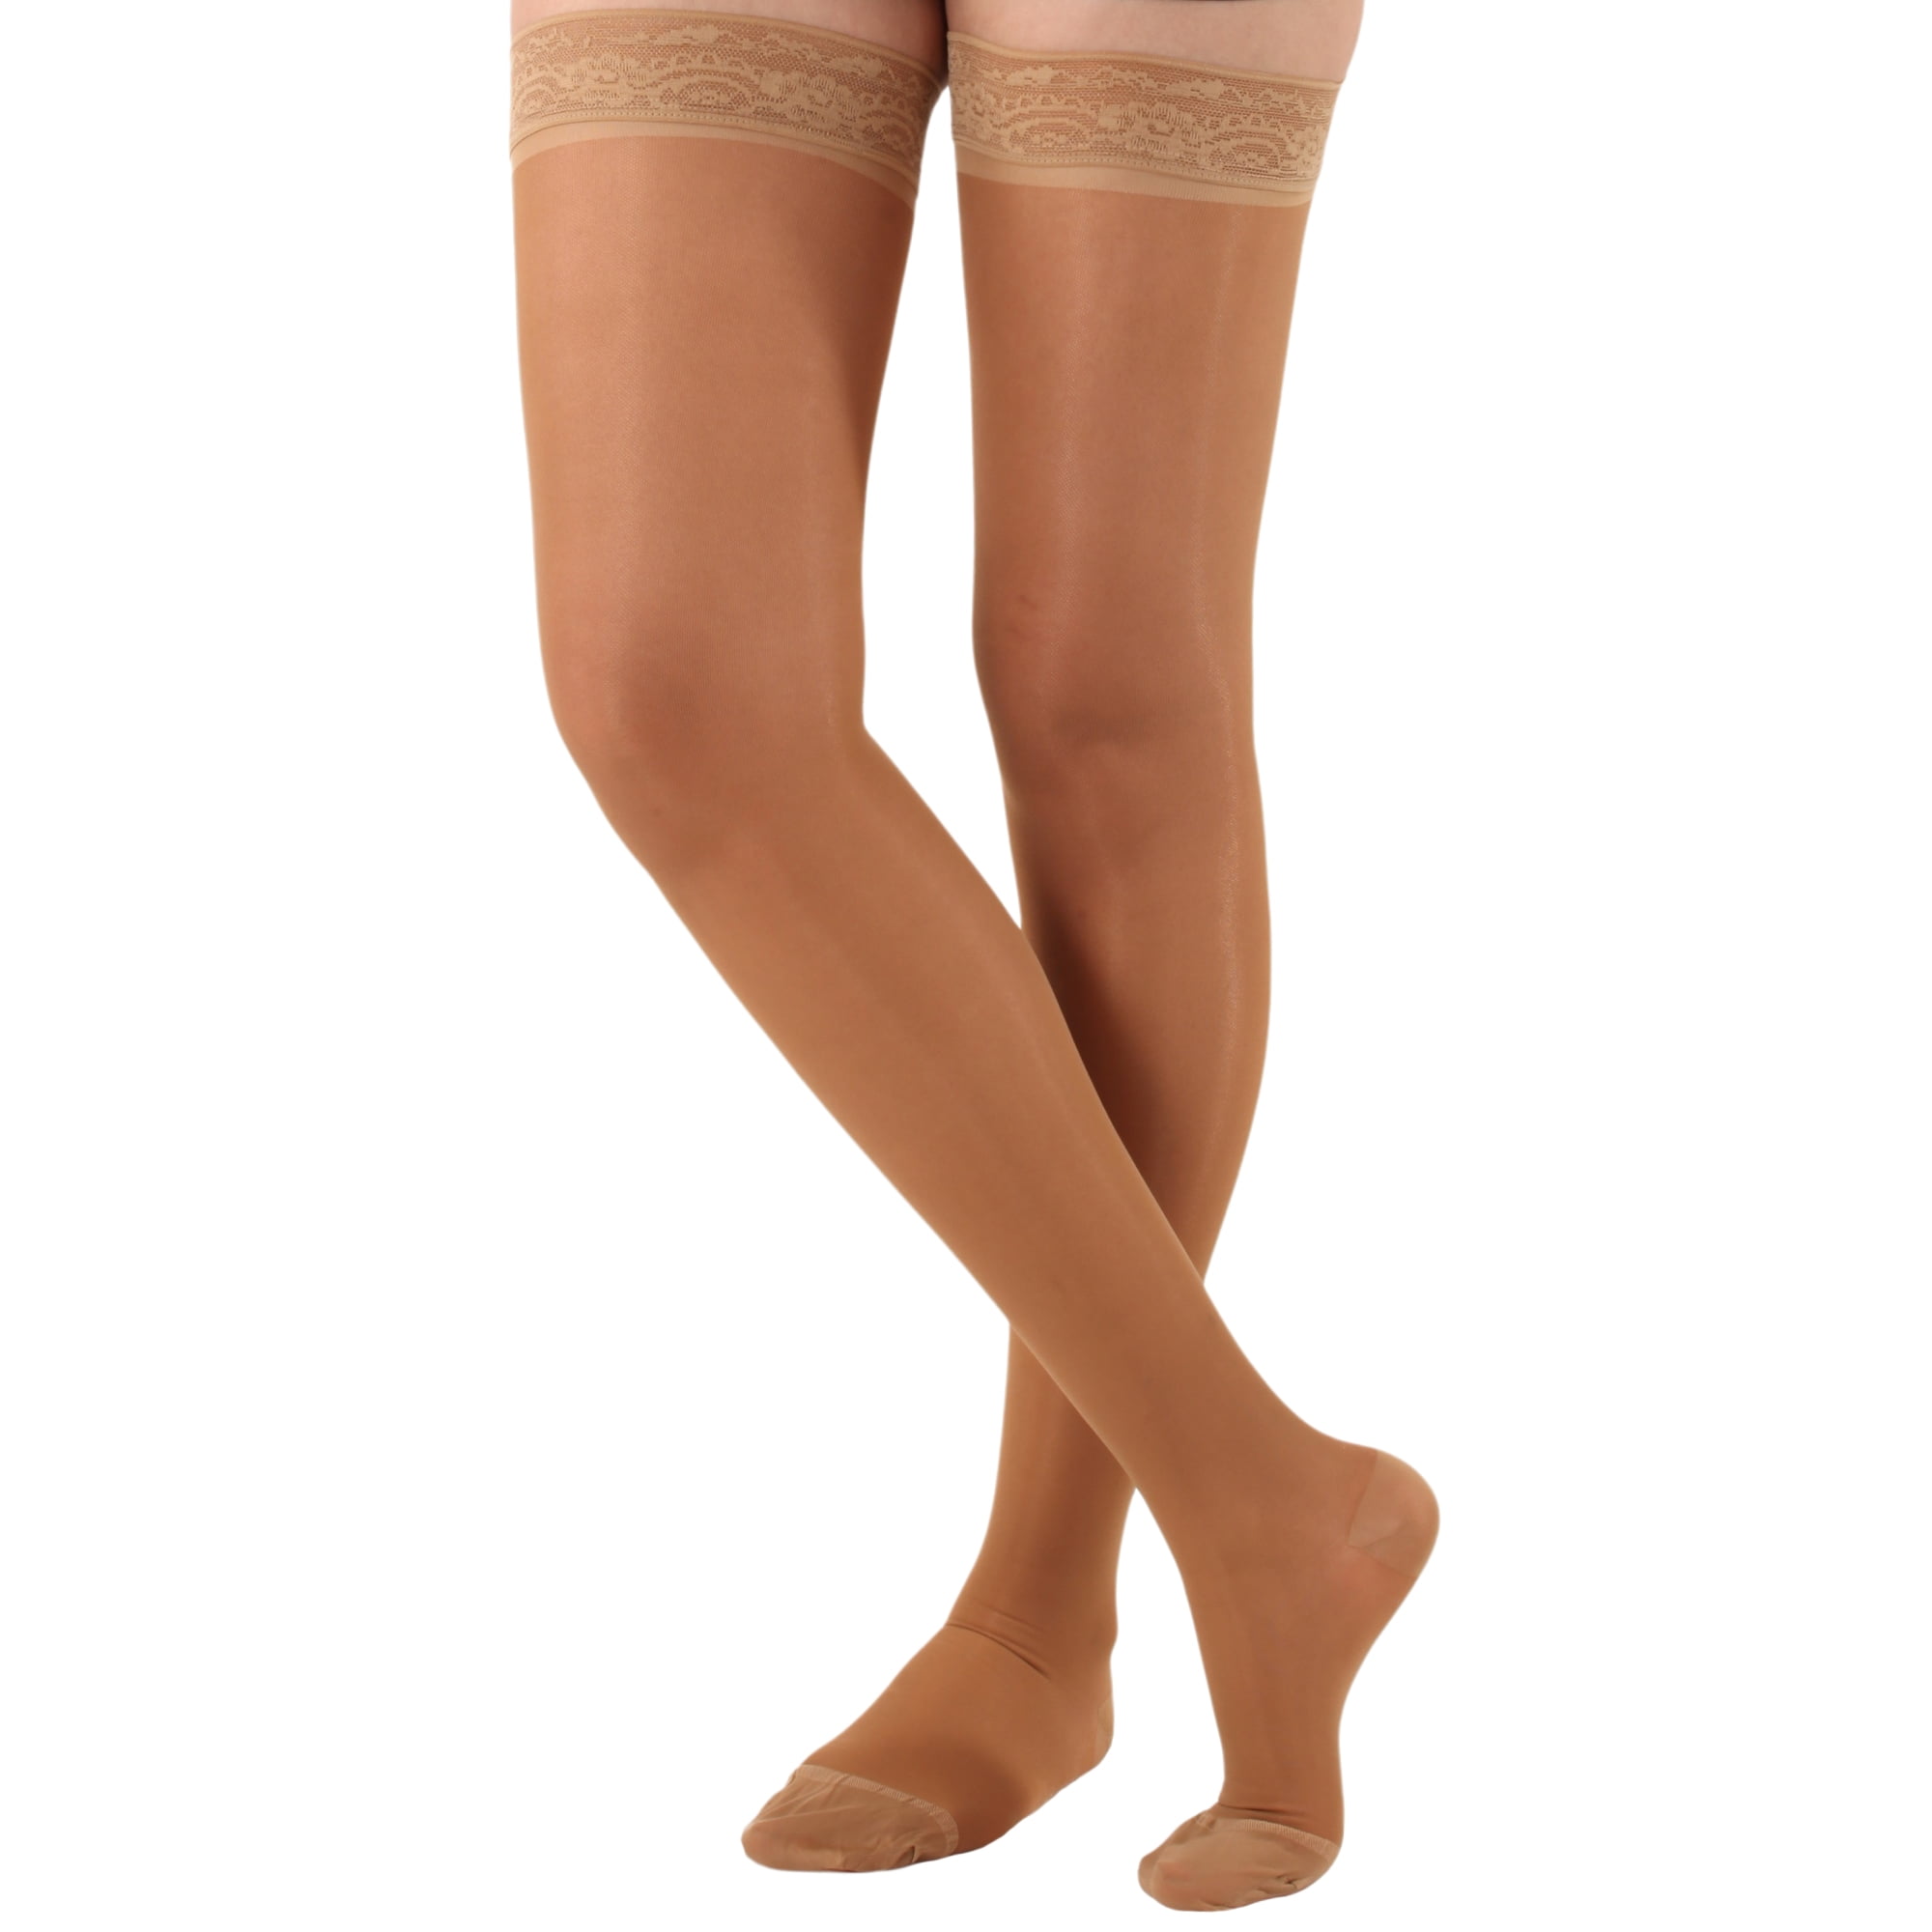 Thigh High Compression Stockings, Moderate (15-20 mmHg), Closed Toe - Made  in USA, Beige, Medium - Made in The USA 